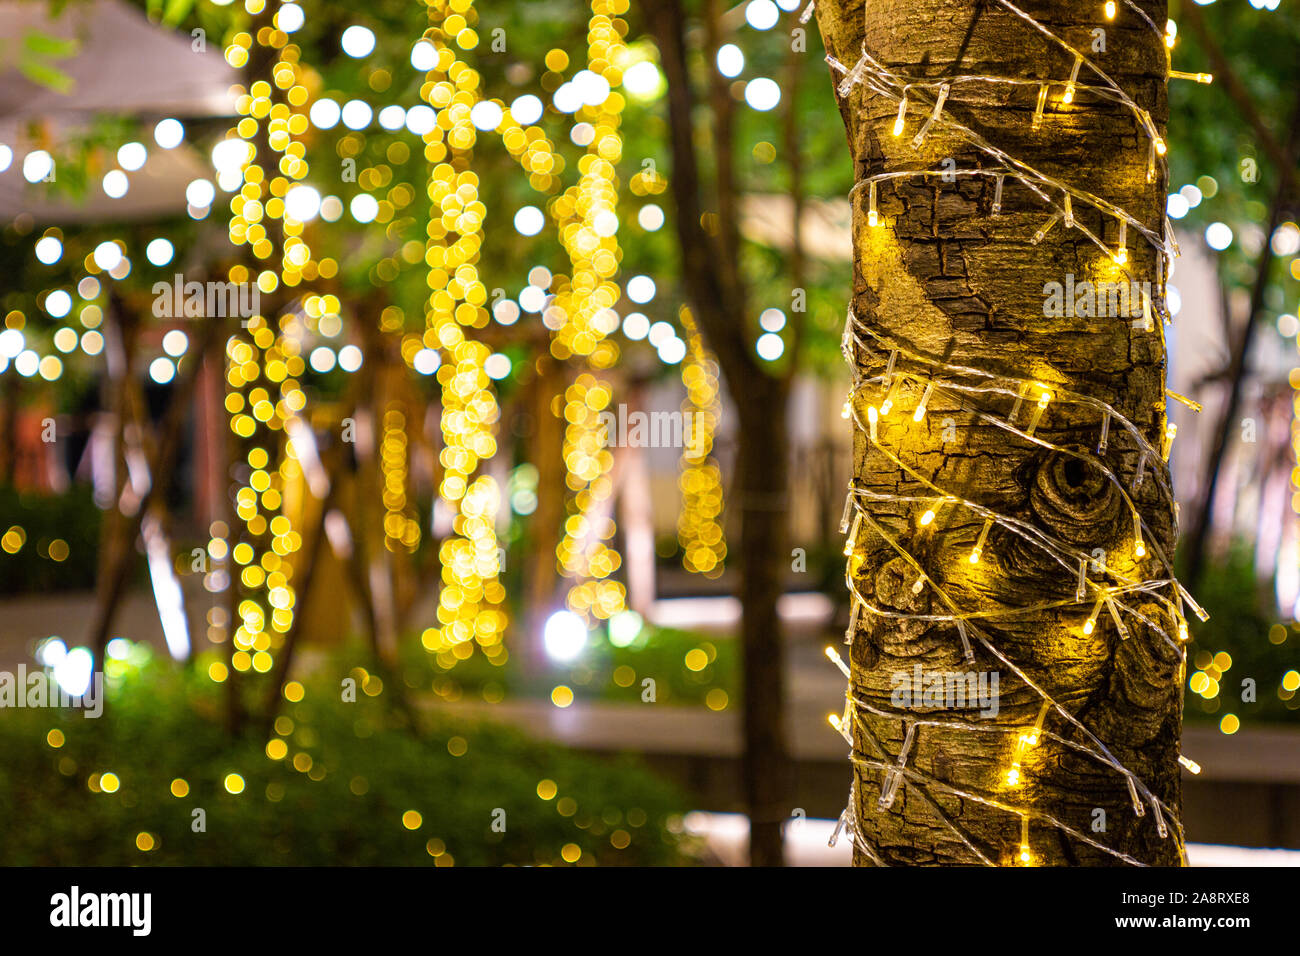 Blur - bokeh Decorative outdoor string lights hanging on tree in